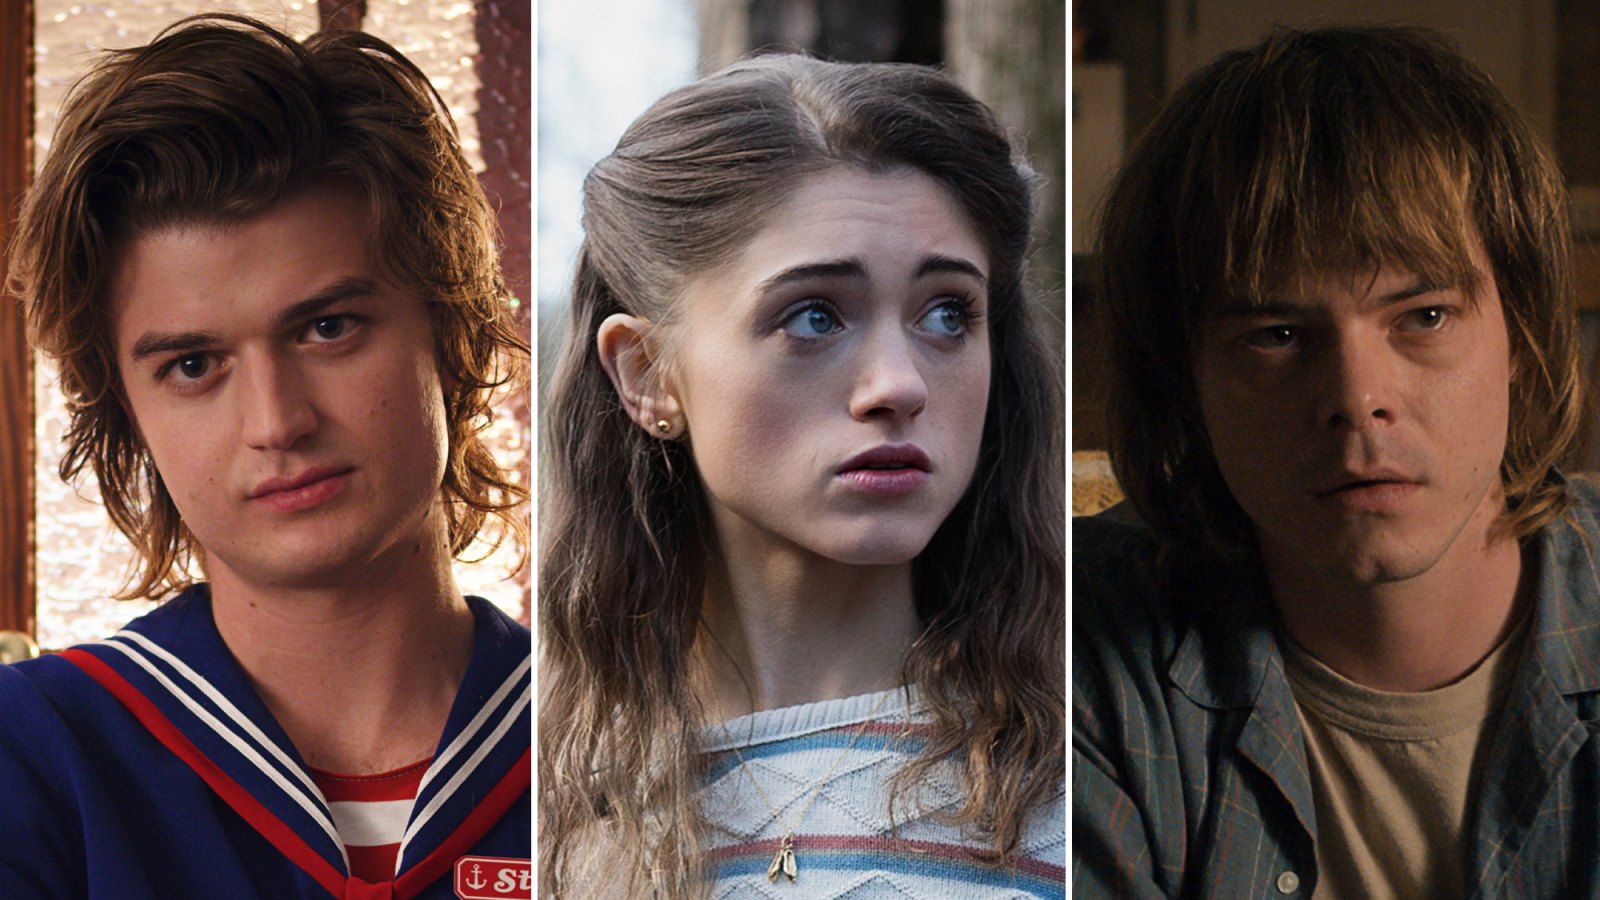 'Stranger Things' Cast Weighs In on Whether Nancy Wheeler Should End Up With Steve Harrington or Jonathan Byers